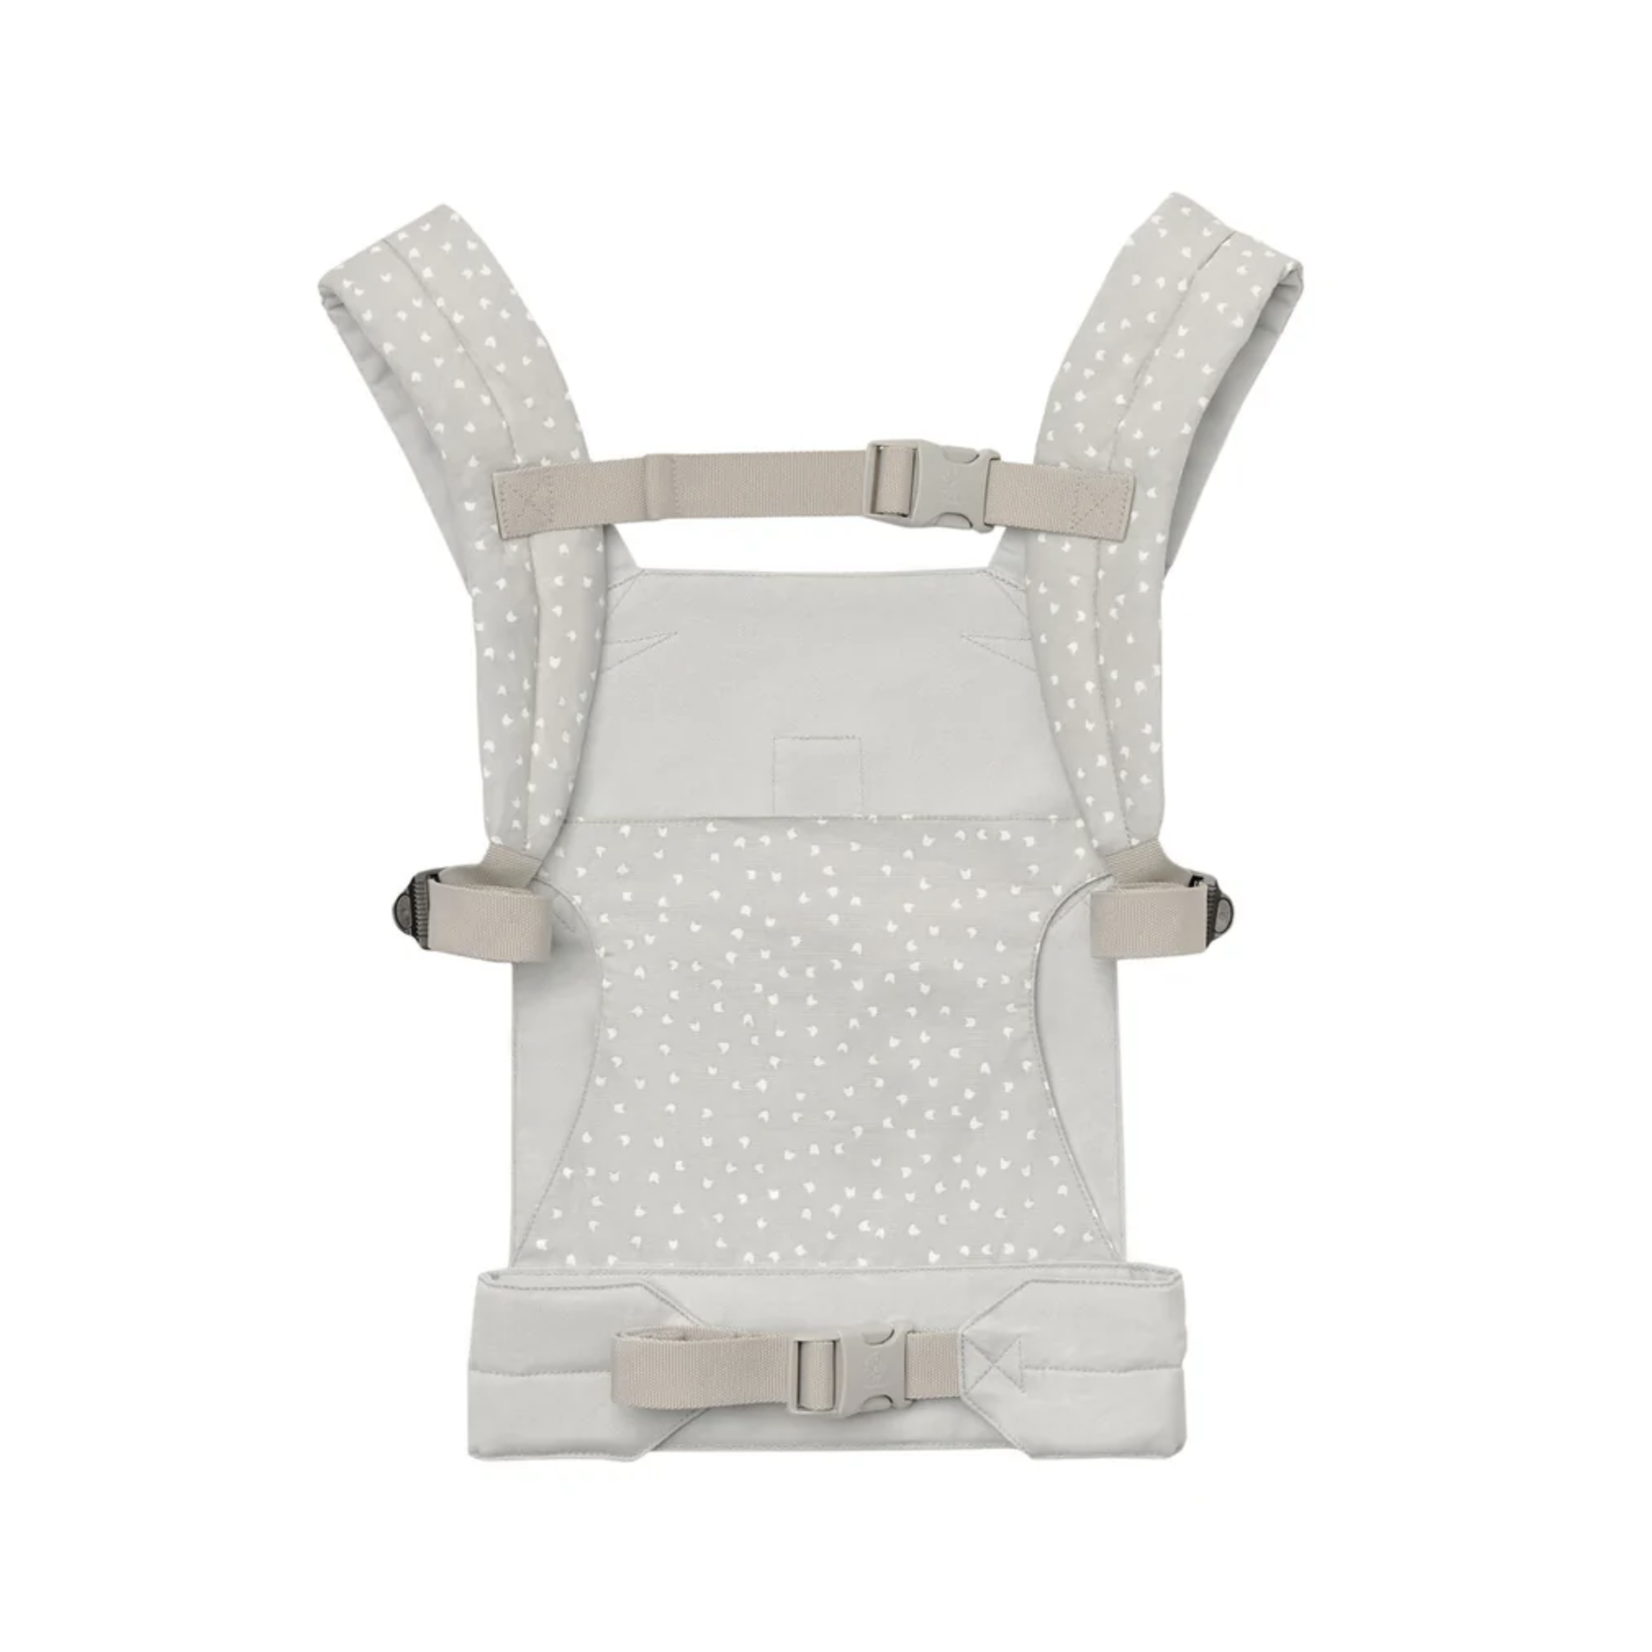 ERGOBABY DOLL CARRIER - DANCING DOTS